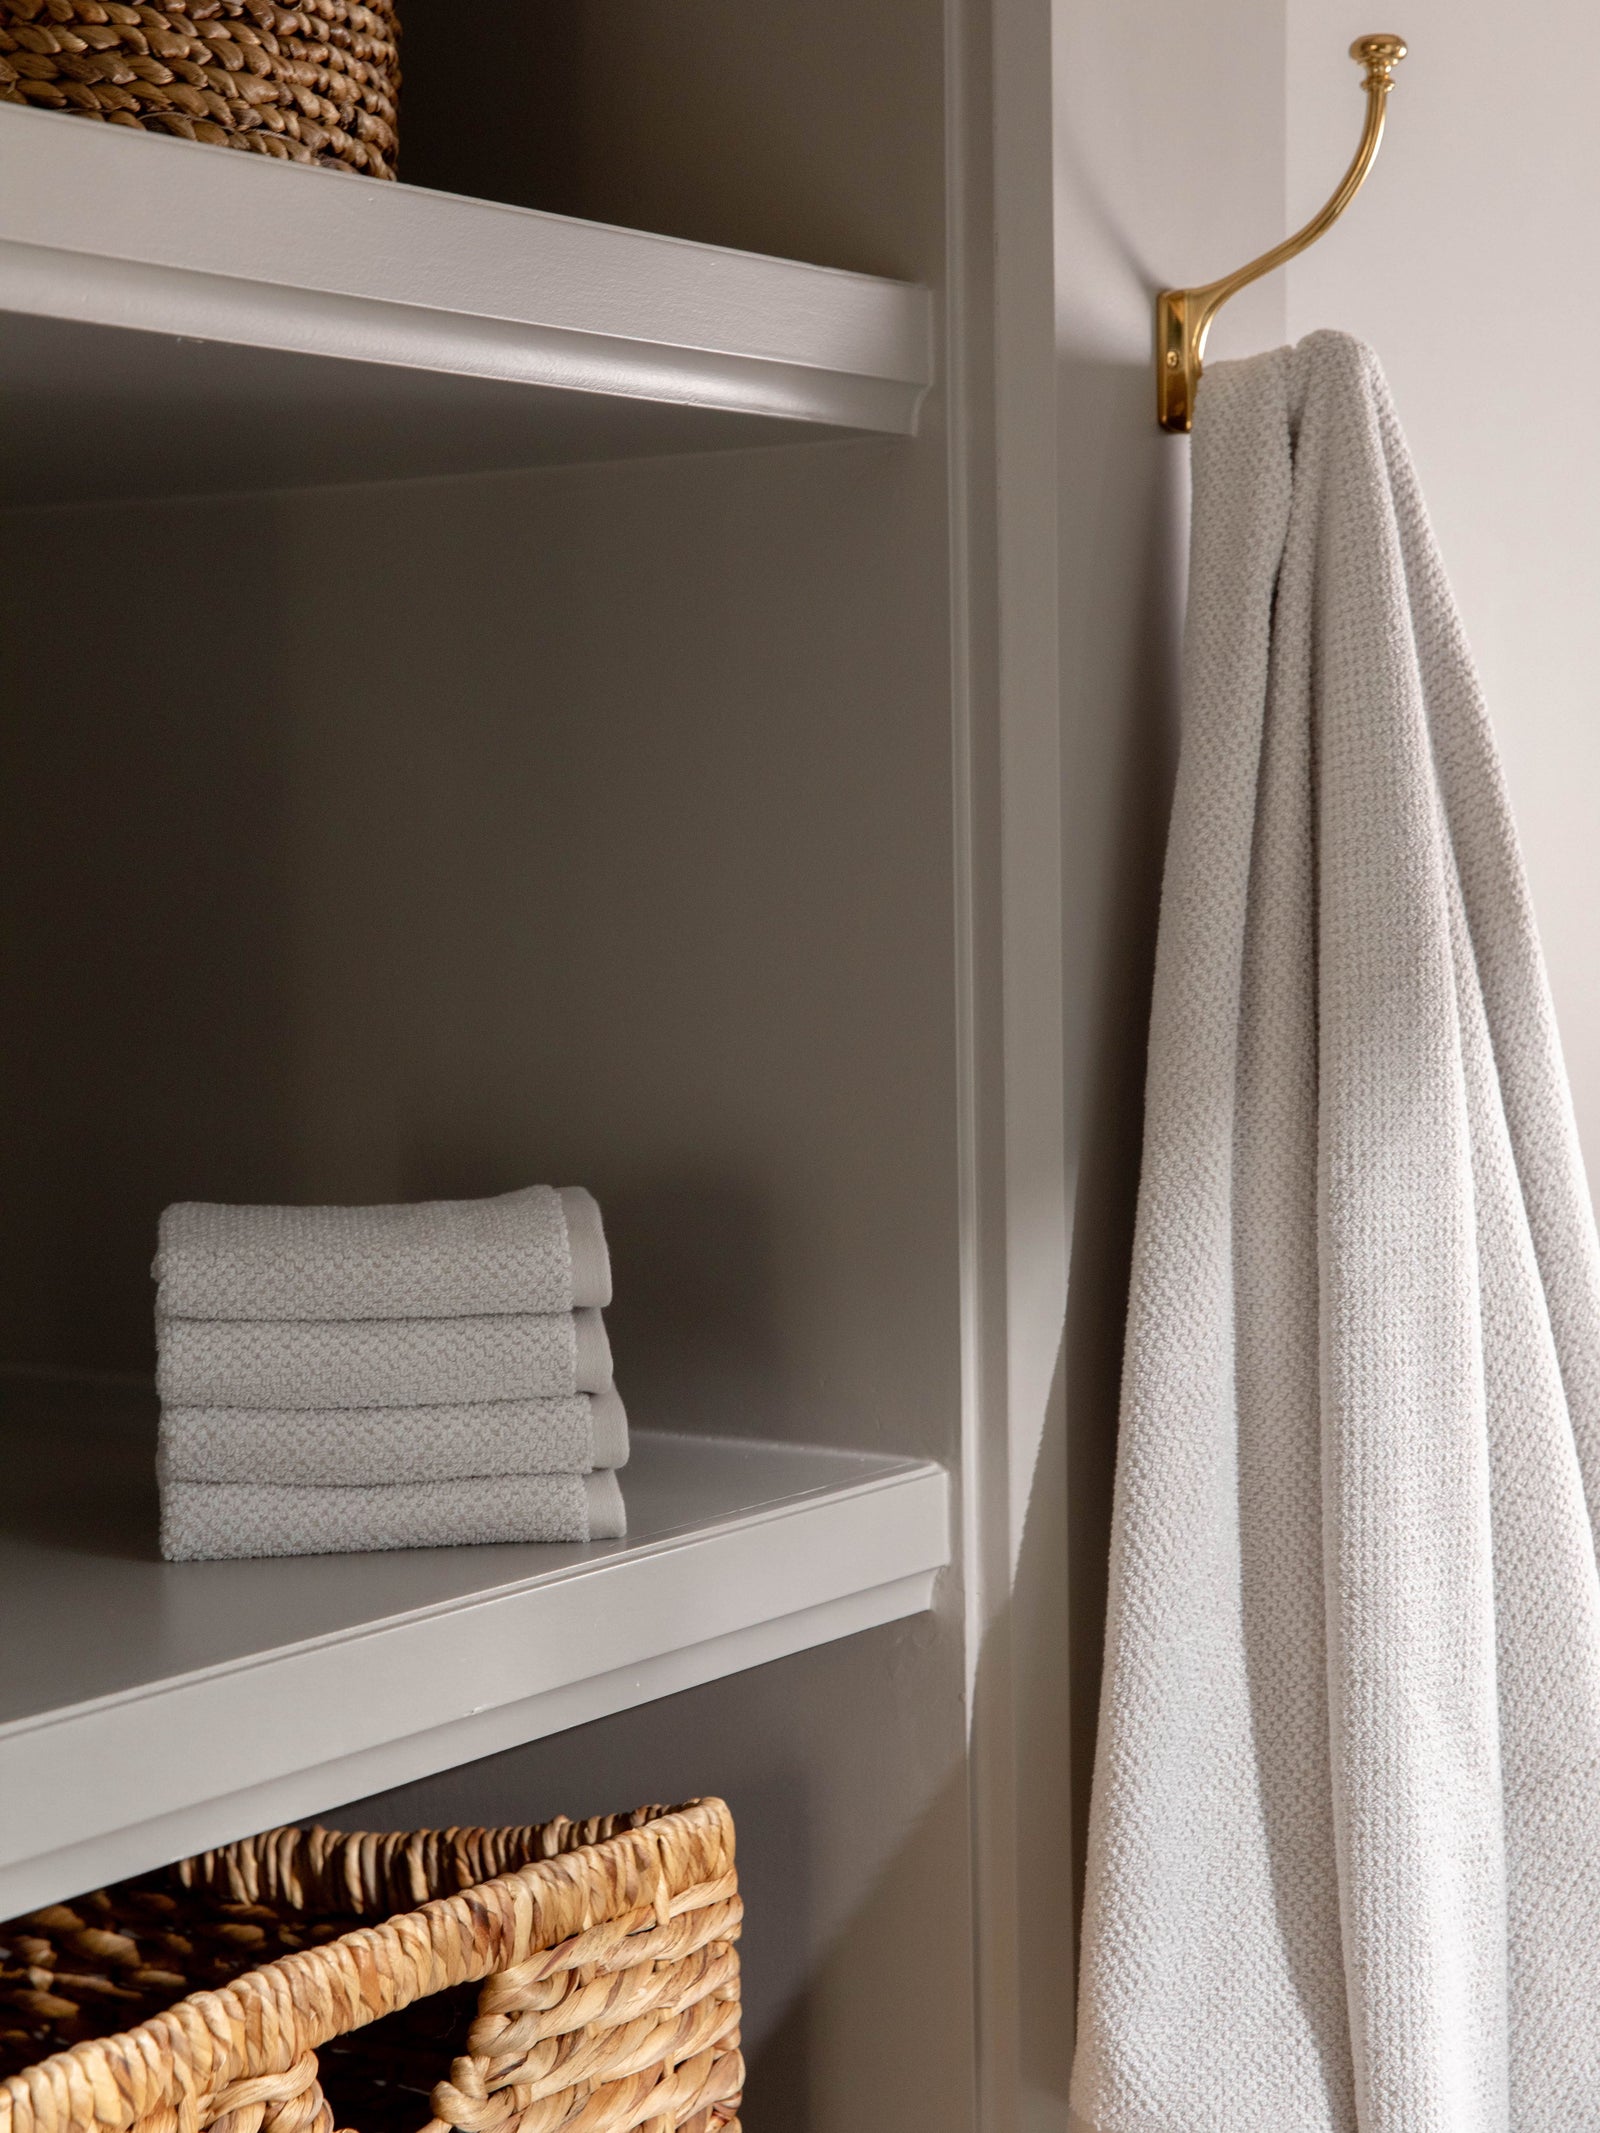 Complete Nantucket Bath Bundle in the color Heathered Light Grey. Photo of Complete Nantucket Bath Bundle taken as the hand towels, wash clothes, and bath towels are neatly placed on shelves in a bathroom. 